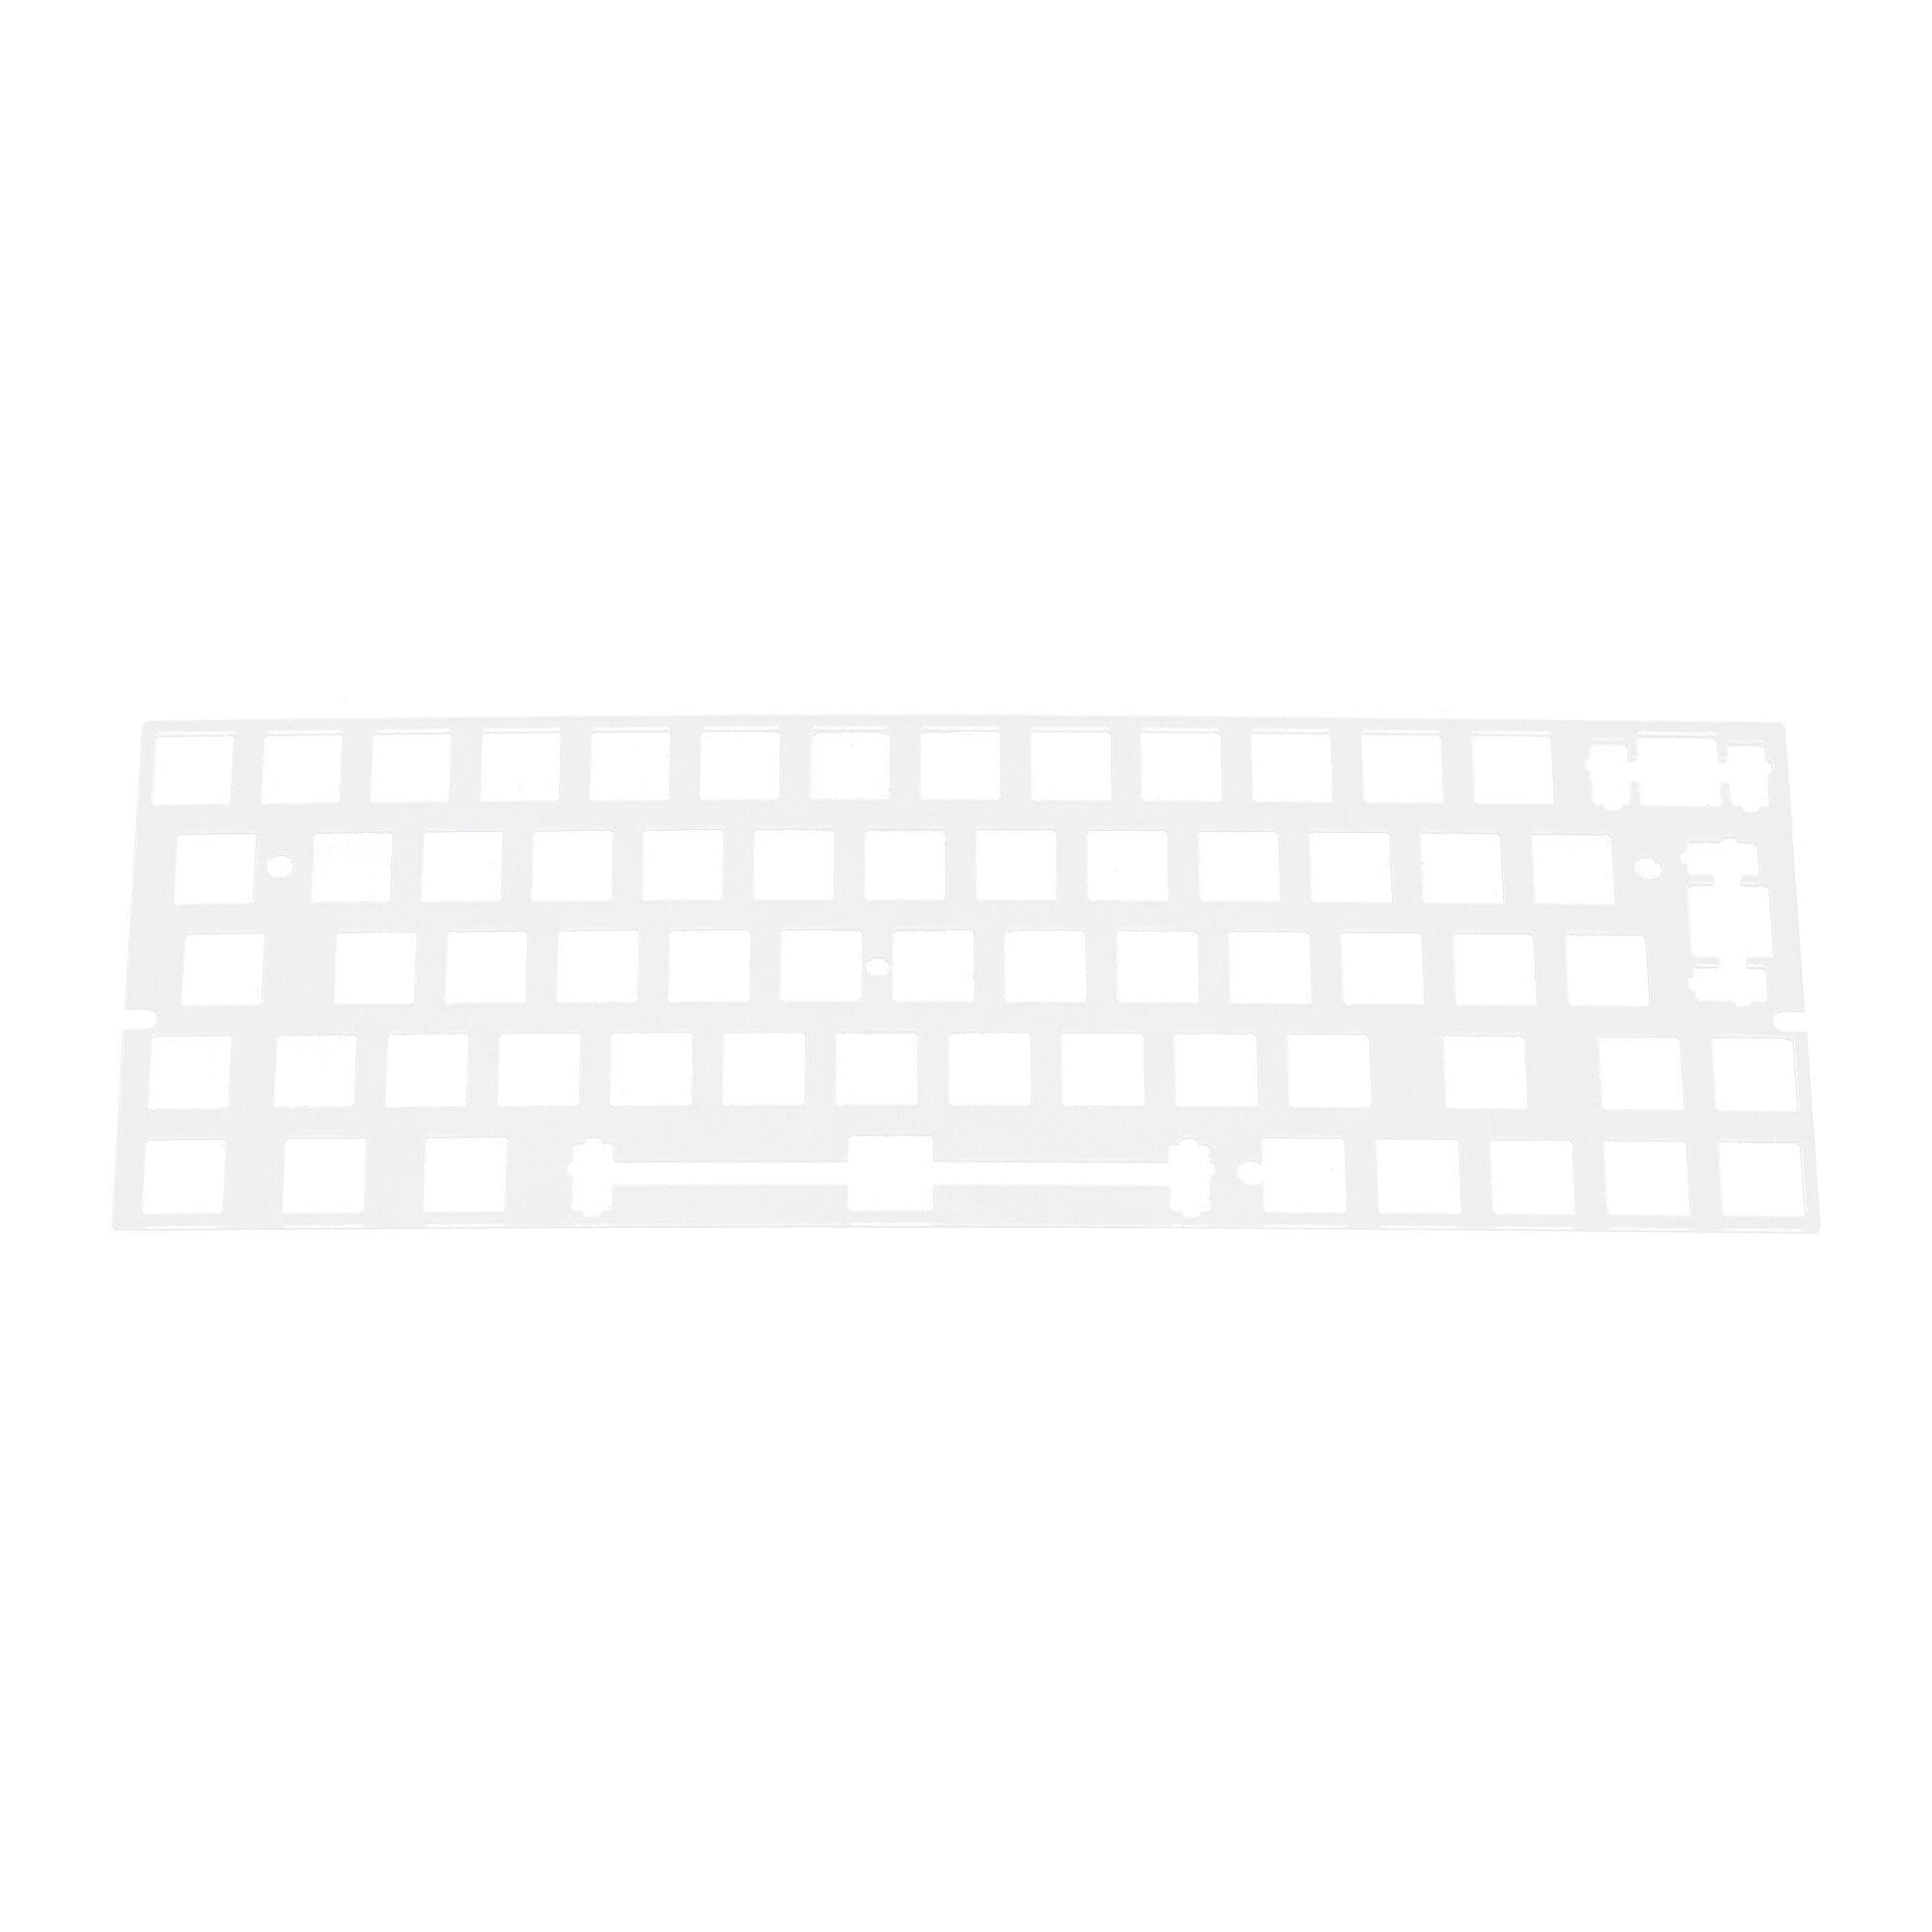 60% PC Polycarbonate Mechanical Keyboard Plate  Custom Keyboards UK PC Plate ISO Edition  